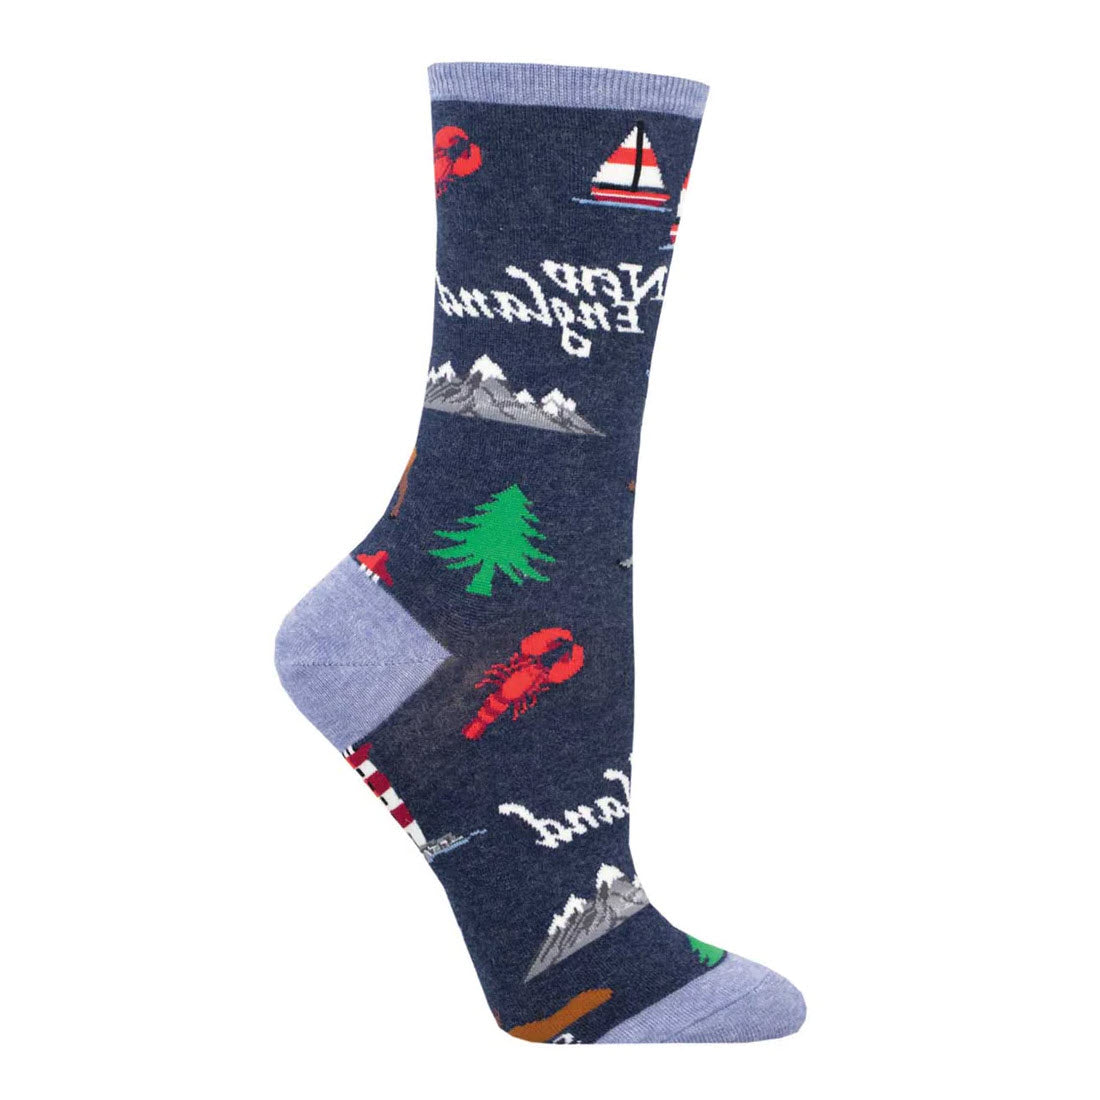 A Socksmith New England Crew Socks Blue - Women featuring colorful patterns of mountains, trees, a lighthouse, a sailboat, and lobsters.